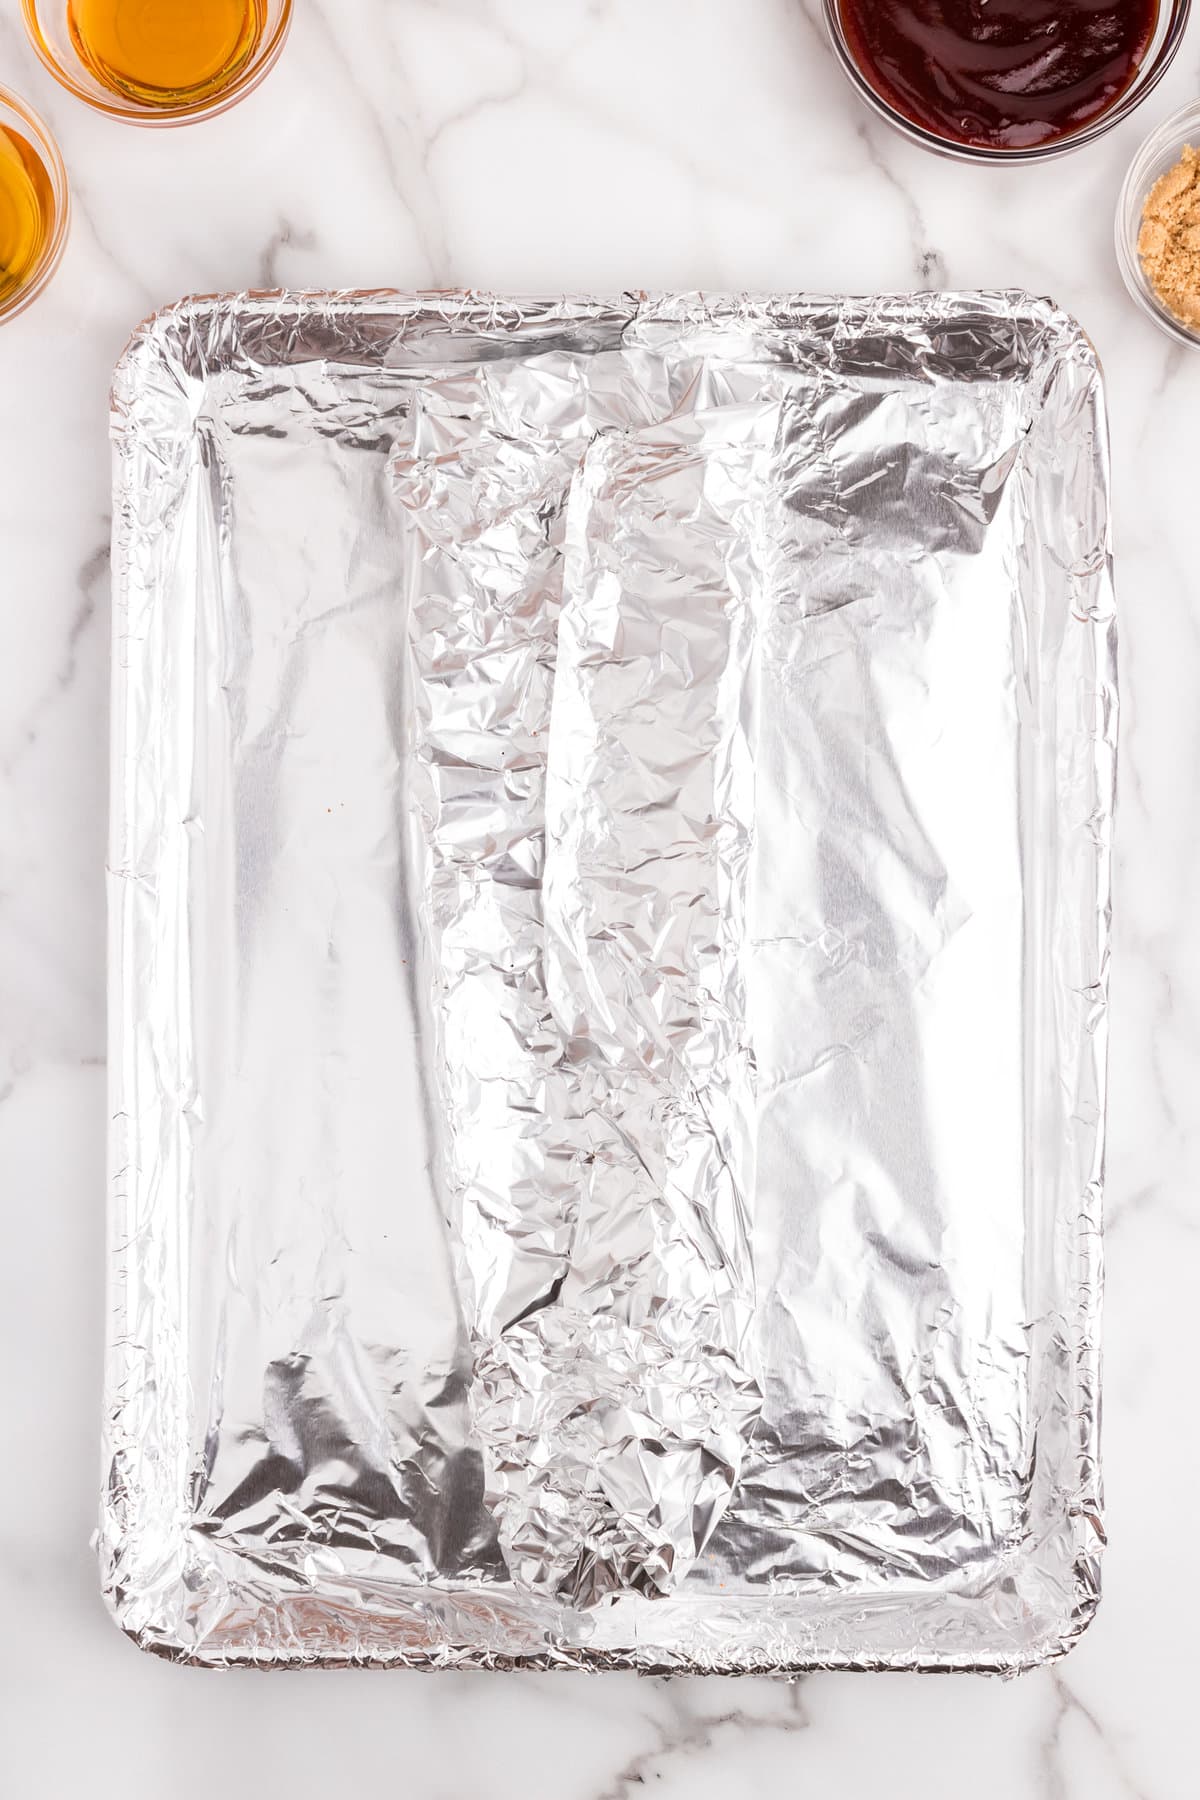 Wrapping seasoned baby back ribs in tin foil for baking the Oven Baked Ribs recipe